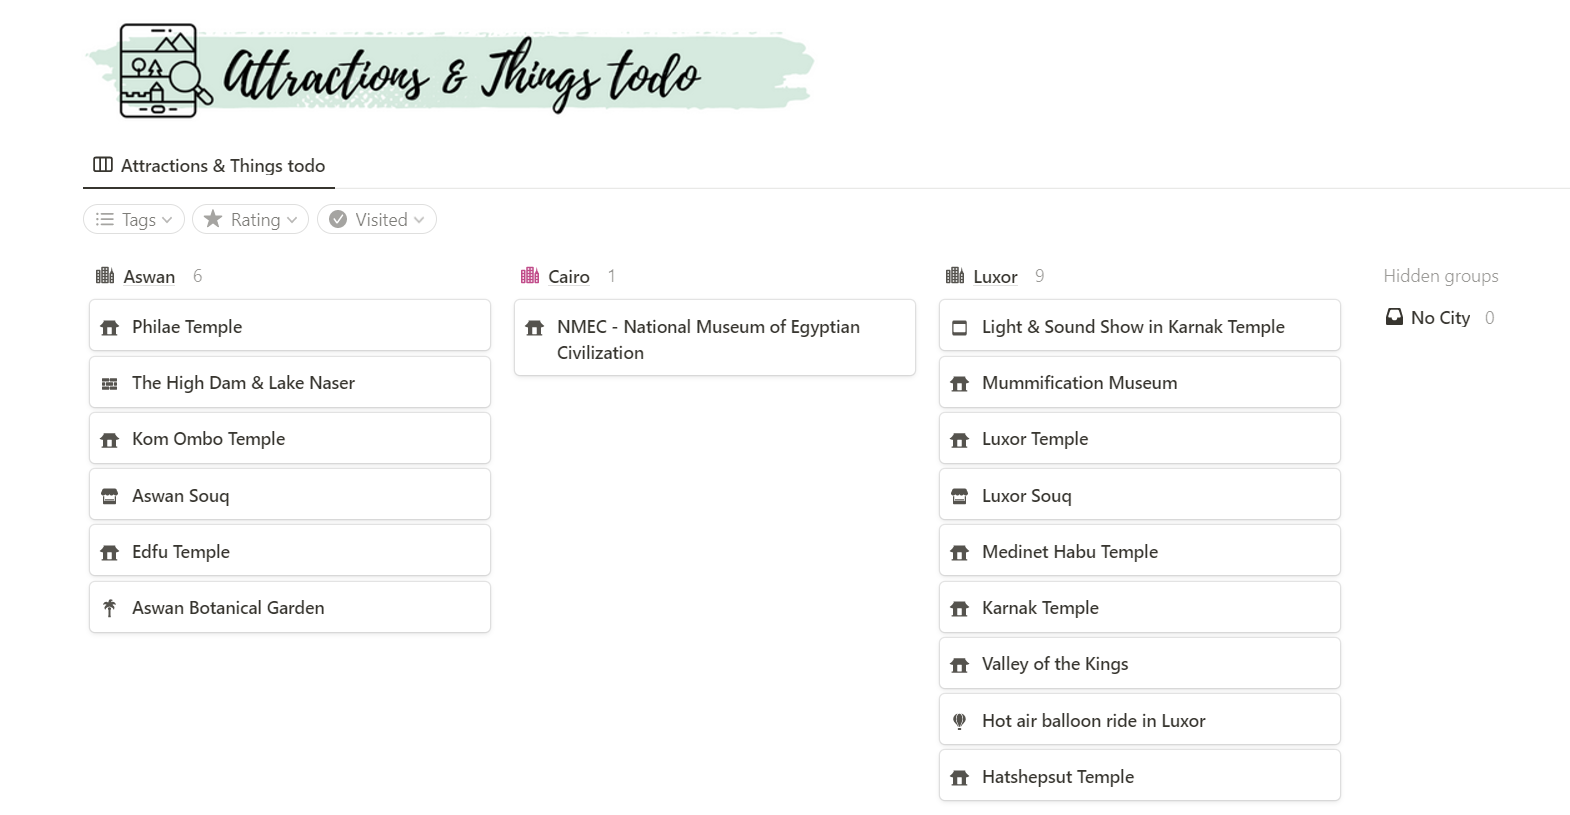 Notion Travel Planner : A list of allthe attractions and things to do in the country groybed by city.